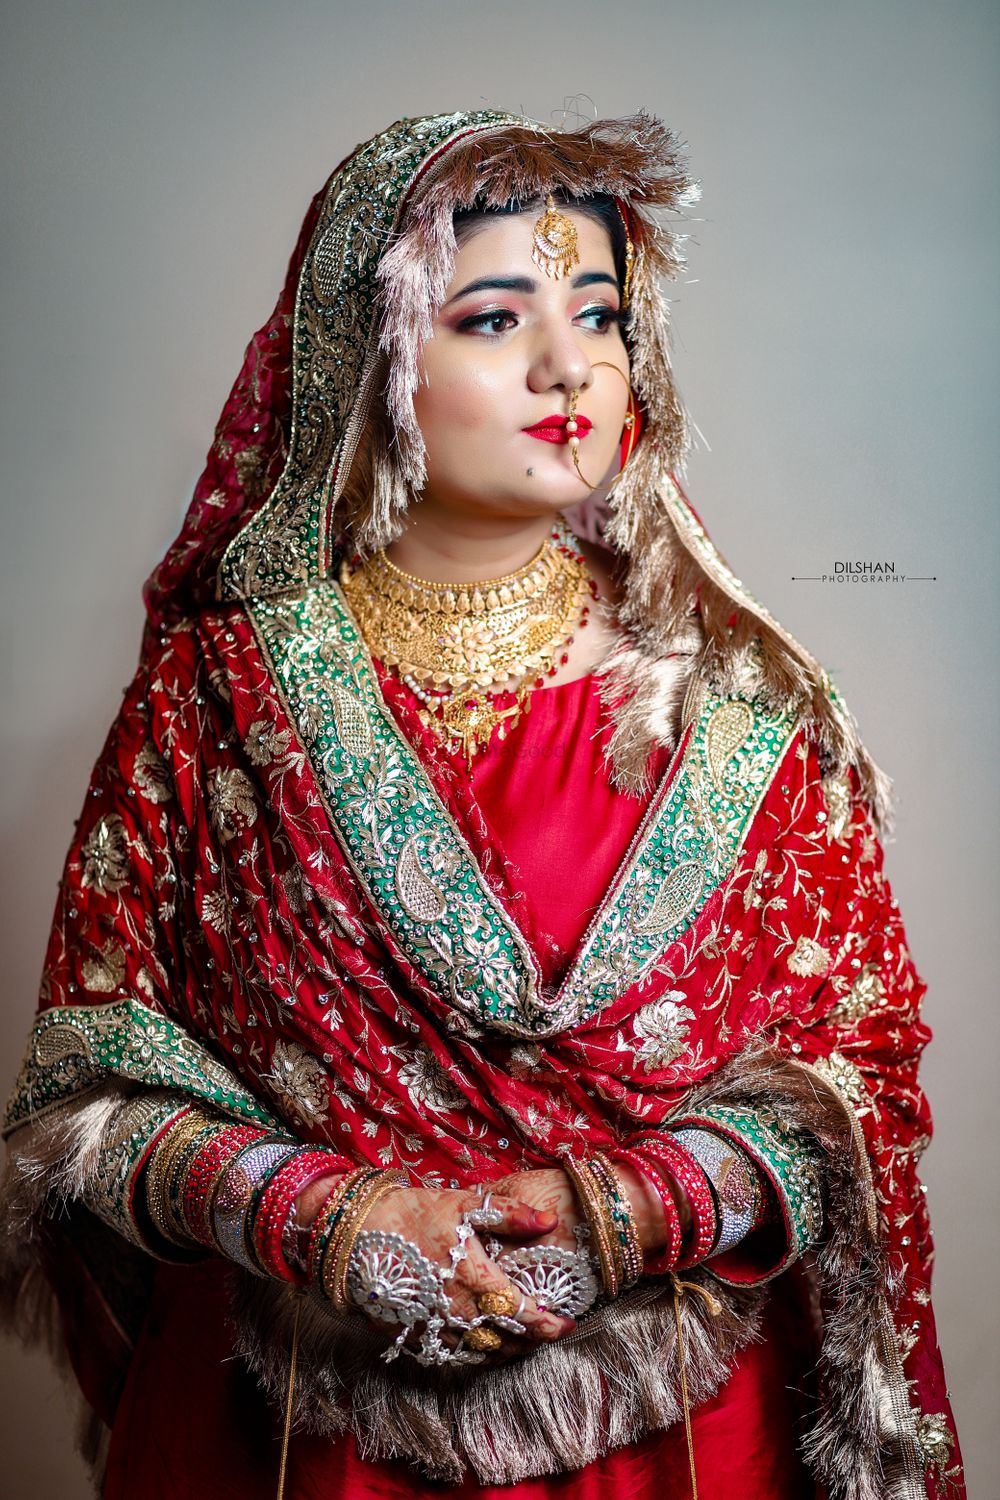 Photo From Amir + Amna - By Dilshan Photography